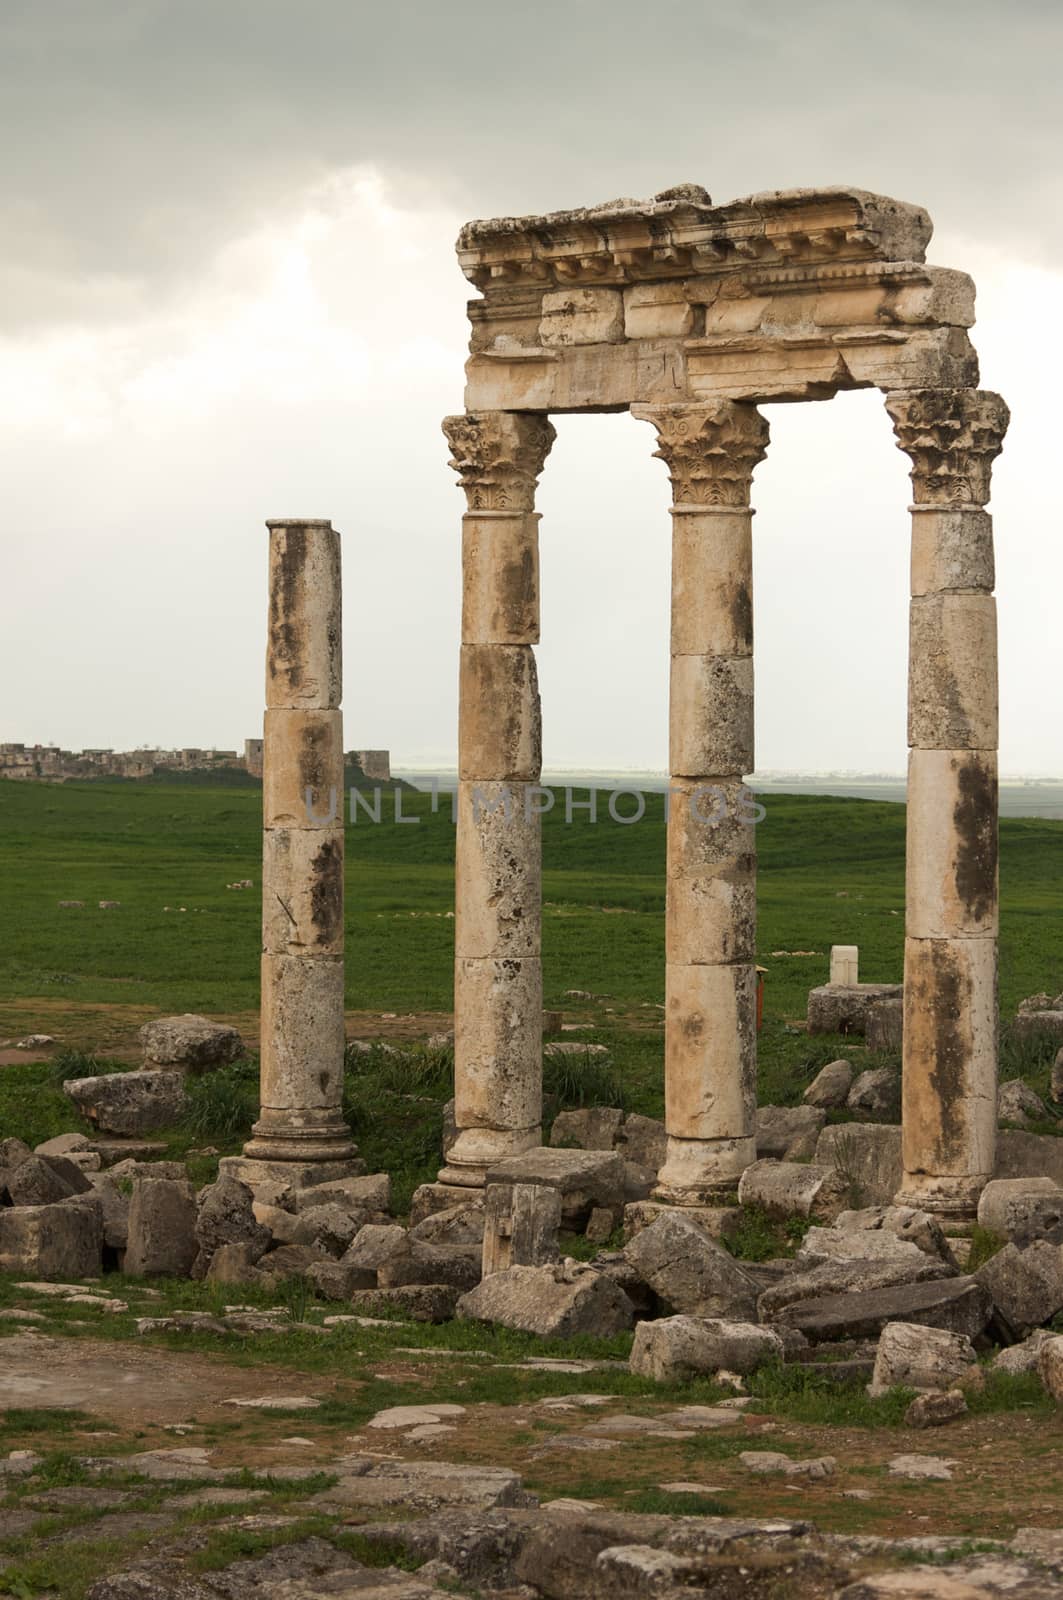 Apamea Syria, ancient ruins with famous colonnade before damage in the war by kgboxford